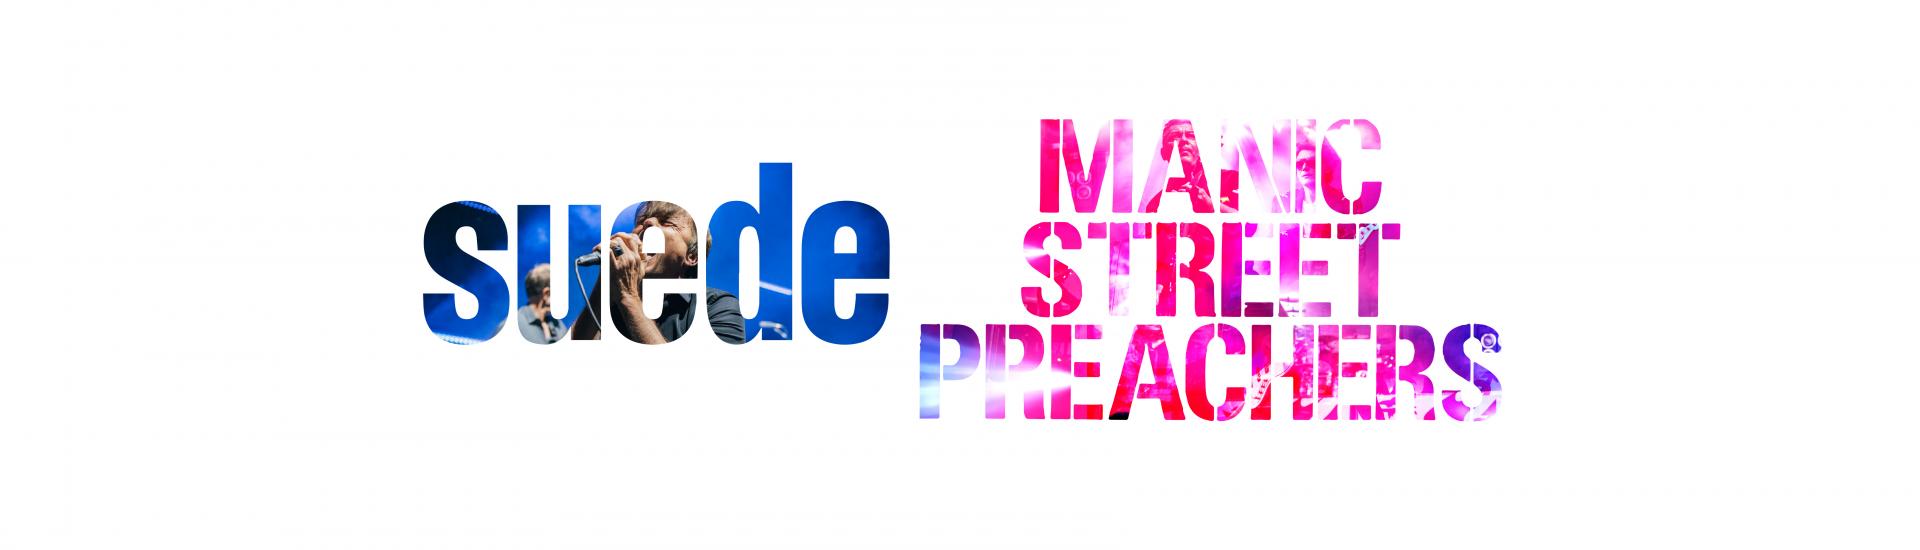 Suede and Manic Street Preachers